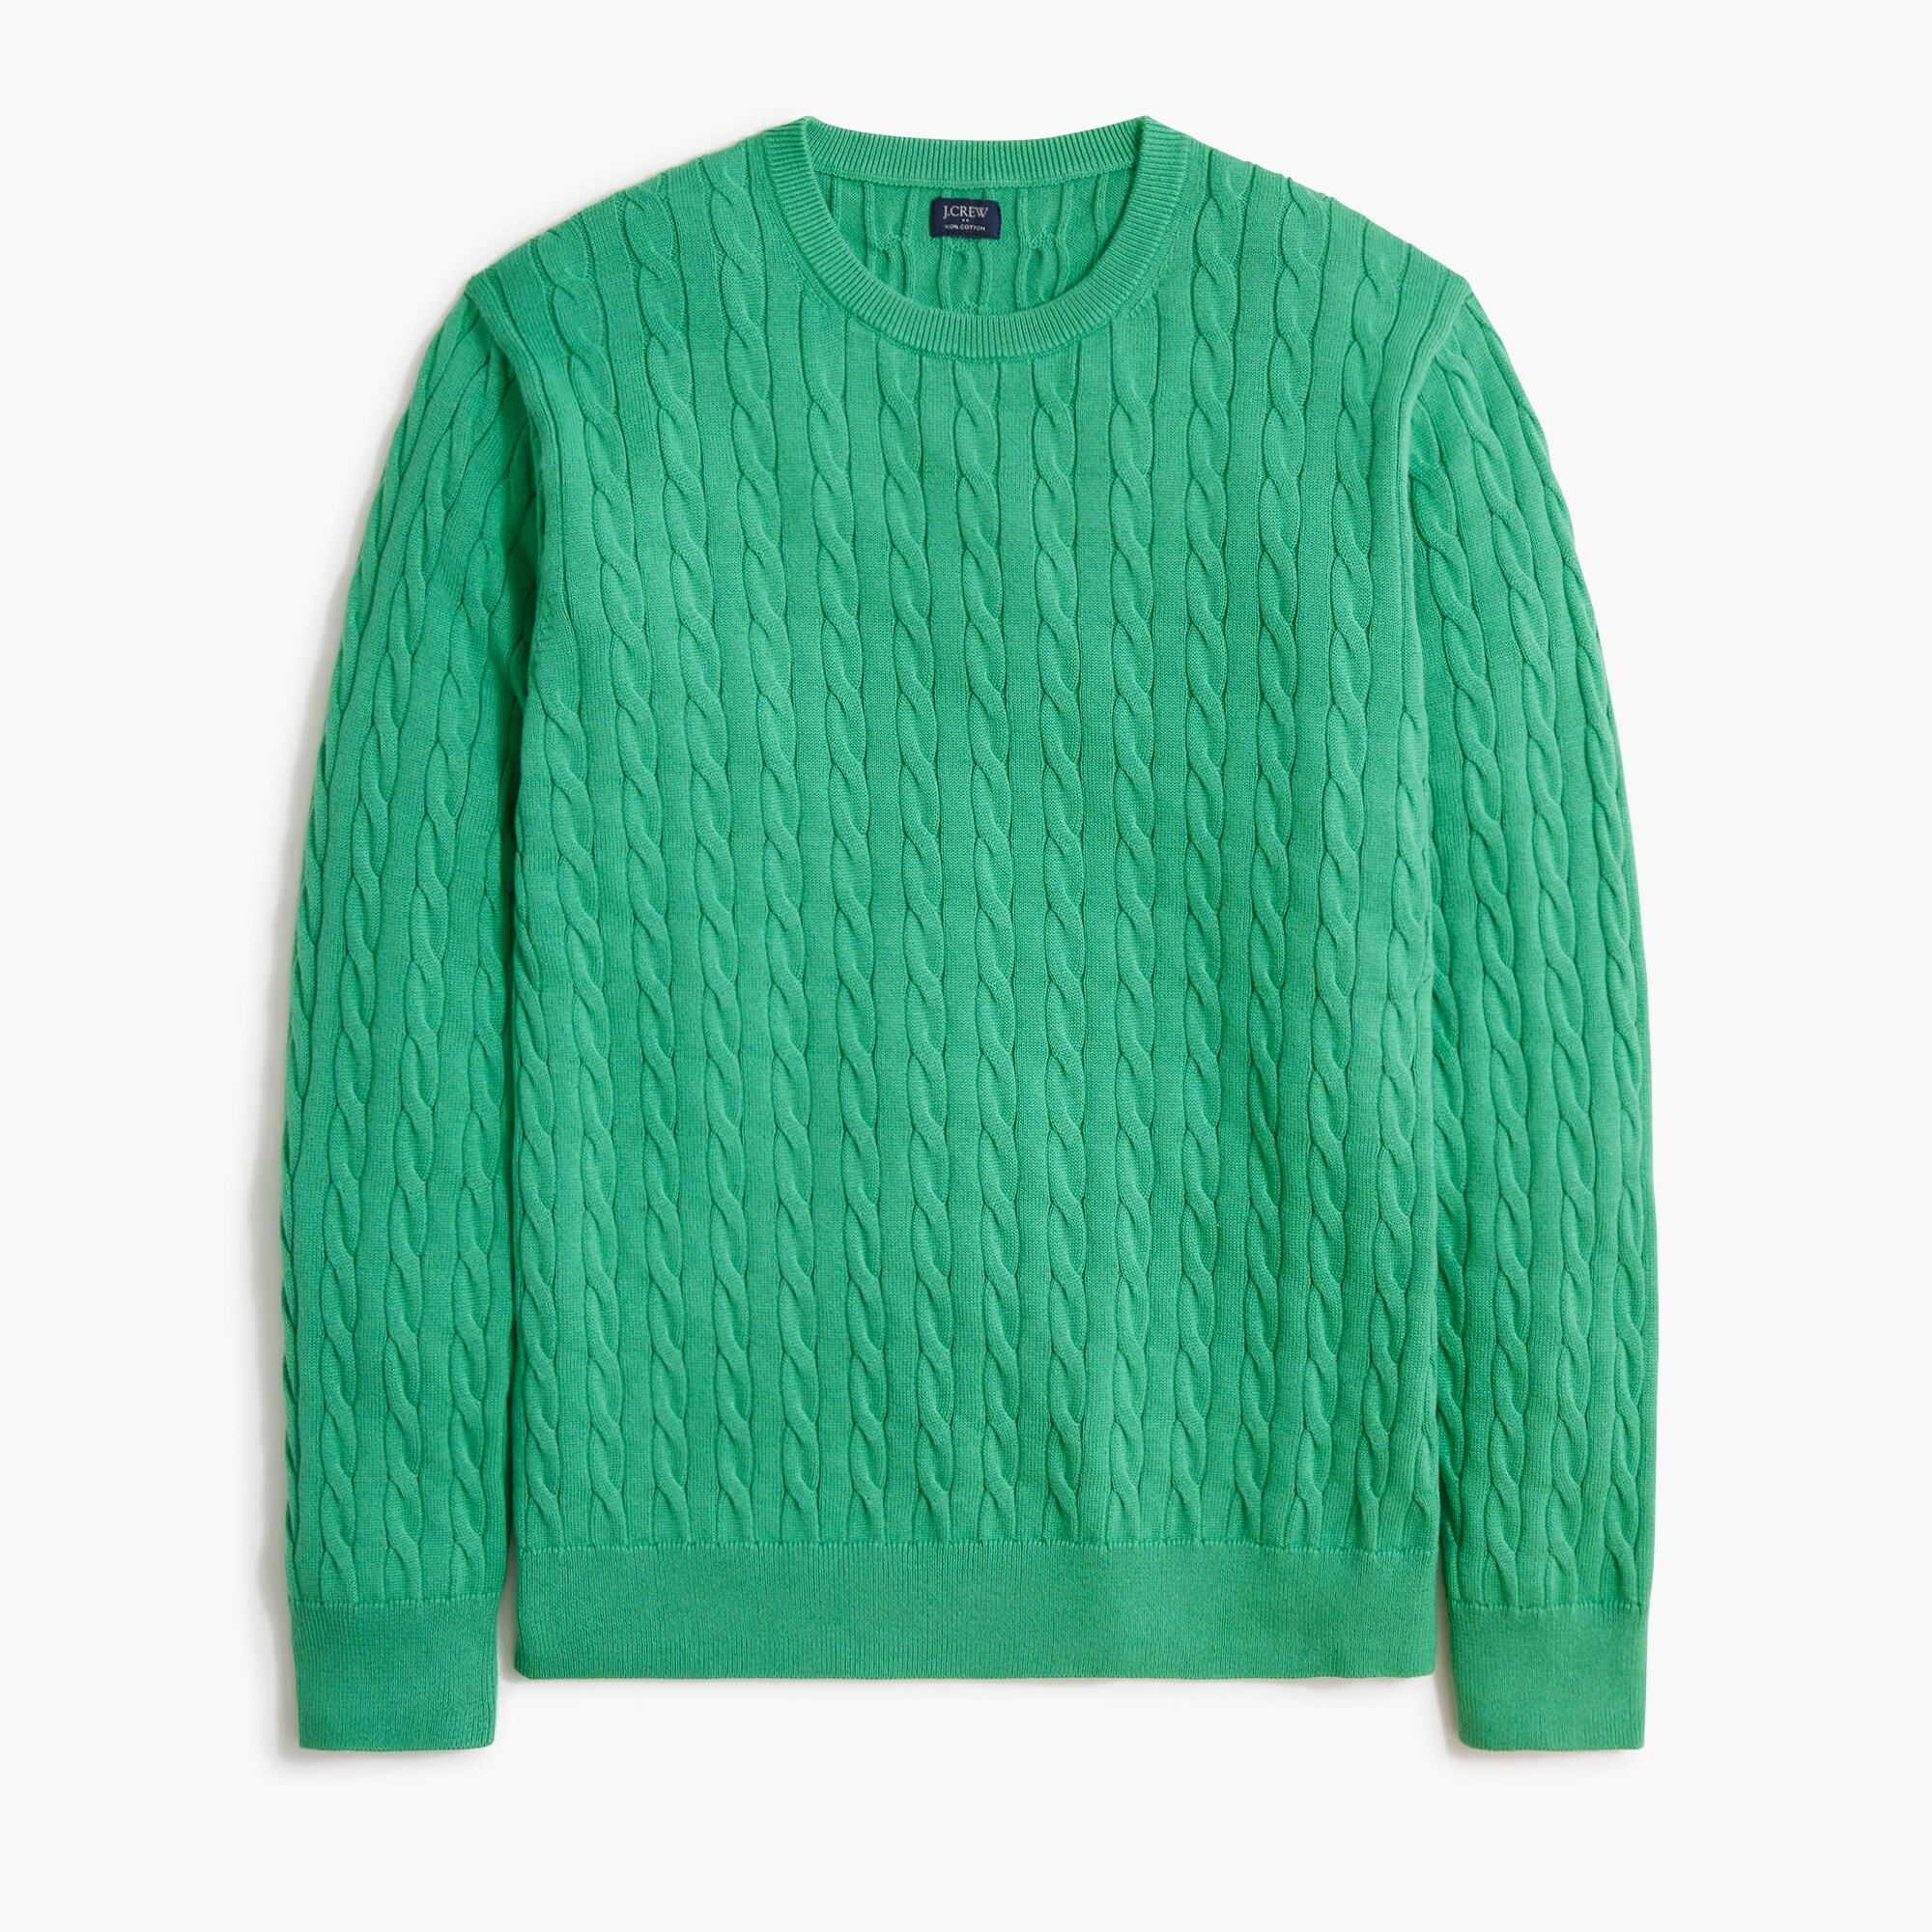  Cable-knit crewneck sweater